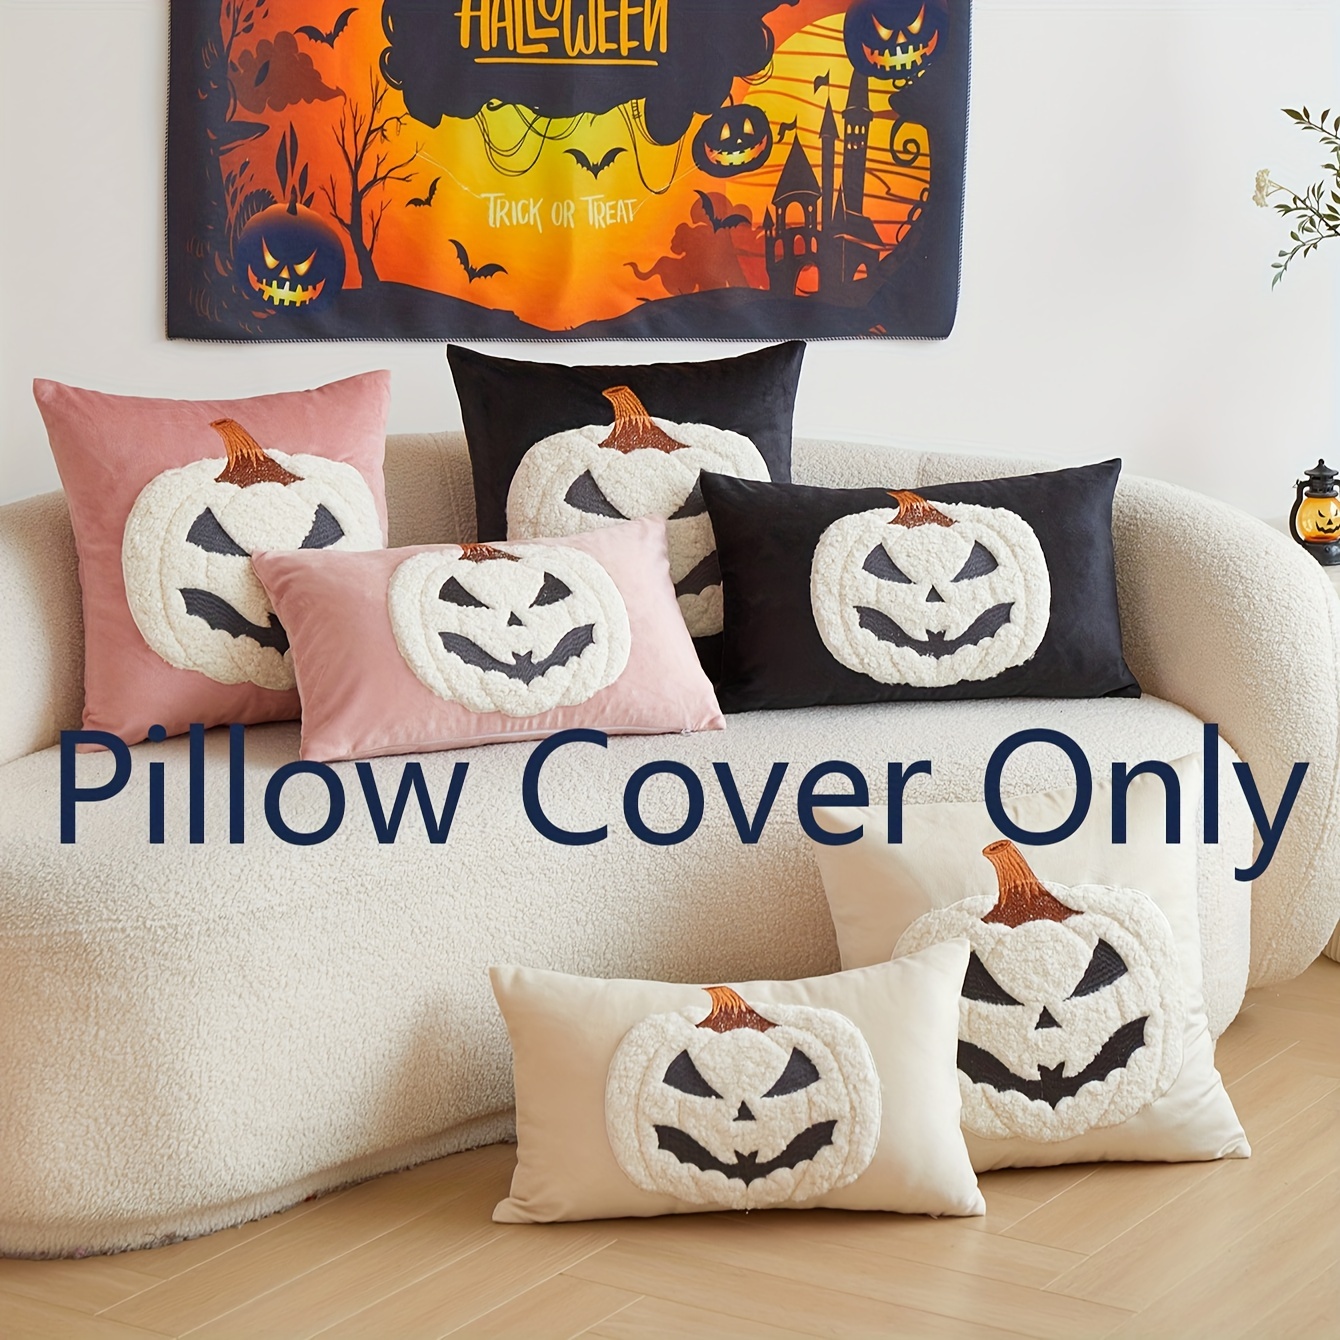 

Vintage Halloween Pumpkin Embroidery Throw Pillow Cover, 17x17 Inch, Decorative Cushion Case With Zipper Closure, Spot Clean, Polyester, For Home Decor, Party, Various Room Types - 1 Piece